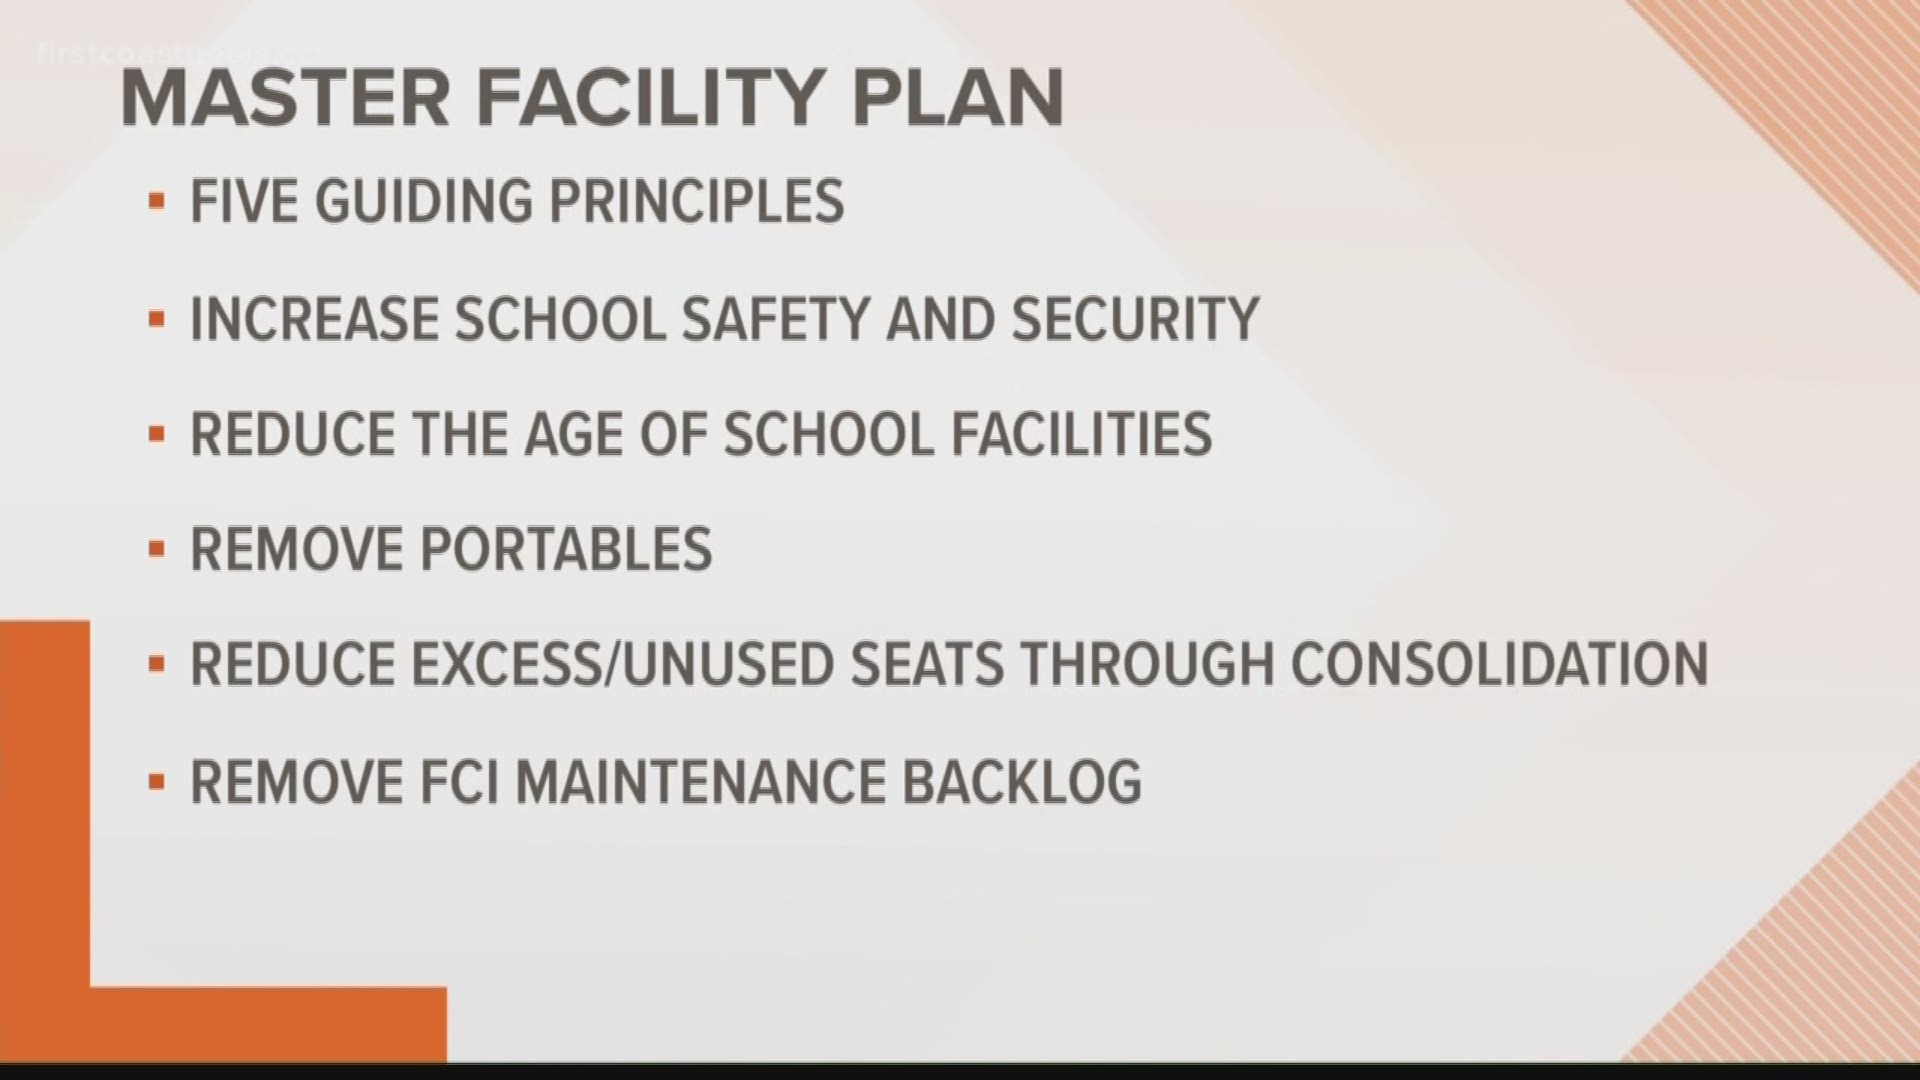 Following a months-long process including 14 workshop meetings, more than 20 community gatherings and multiple plan revisions, the Duval County School Board voted to approve its master facilities plan Tuesday night.